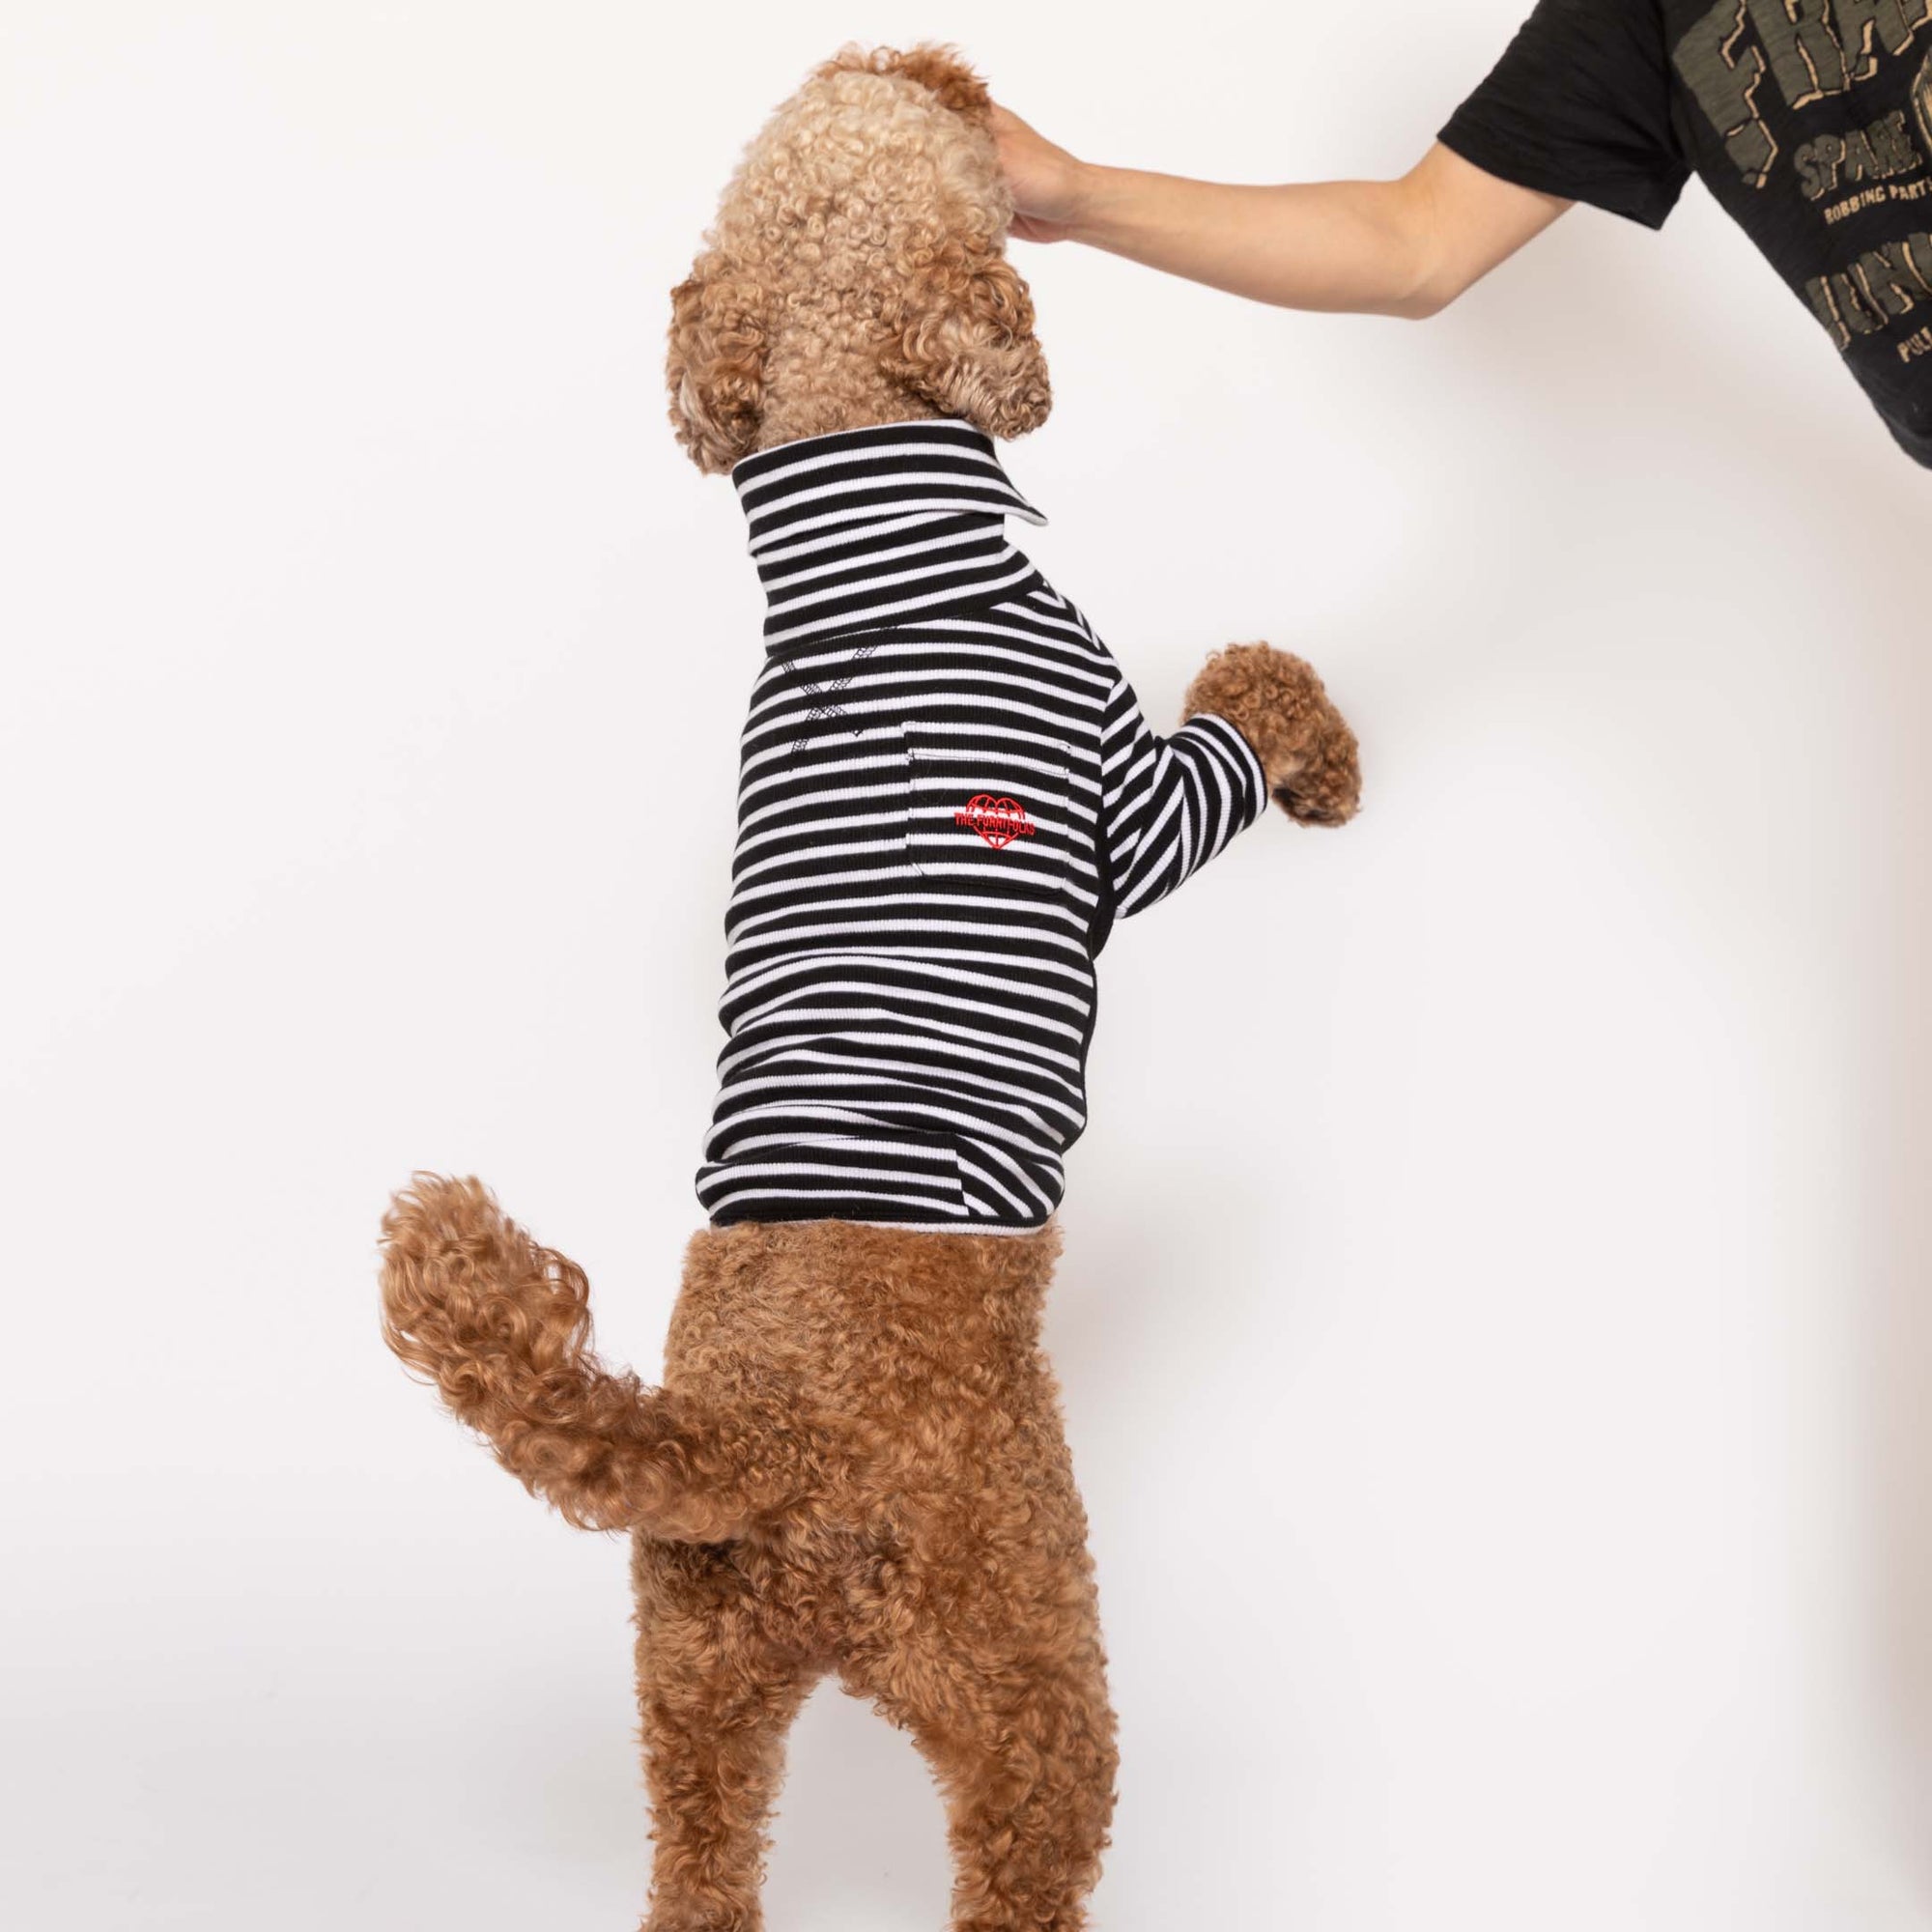 Joyful Poodle wearing a chic black and white striped dog shirt with a cute heart logo, standing on hind legs.